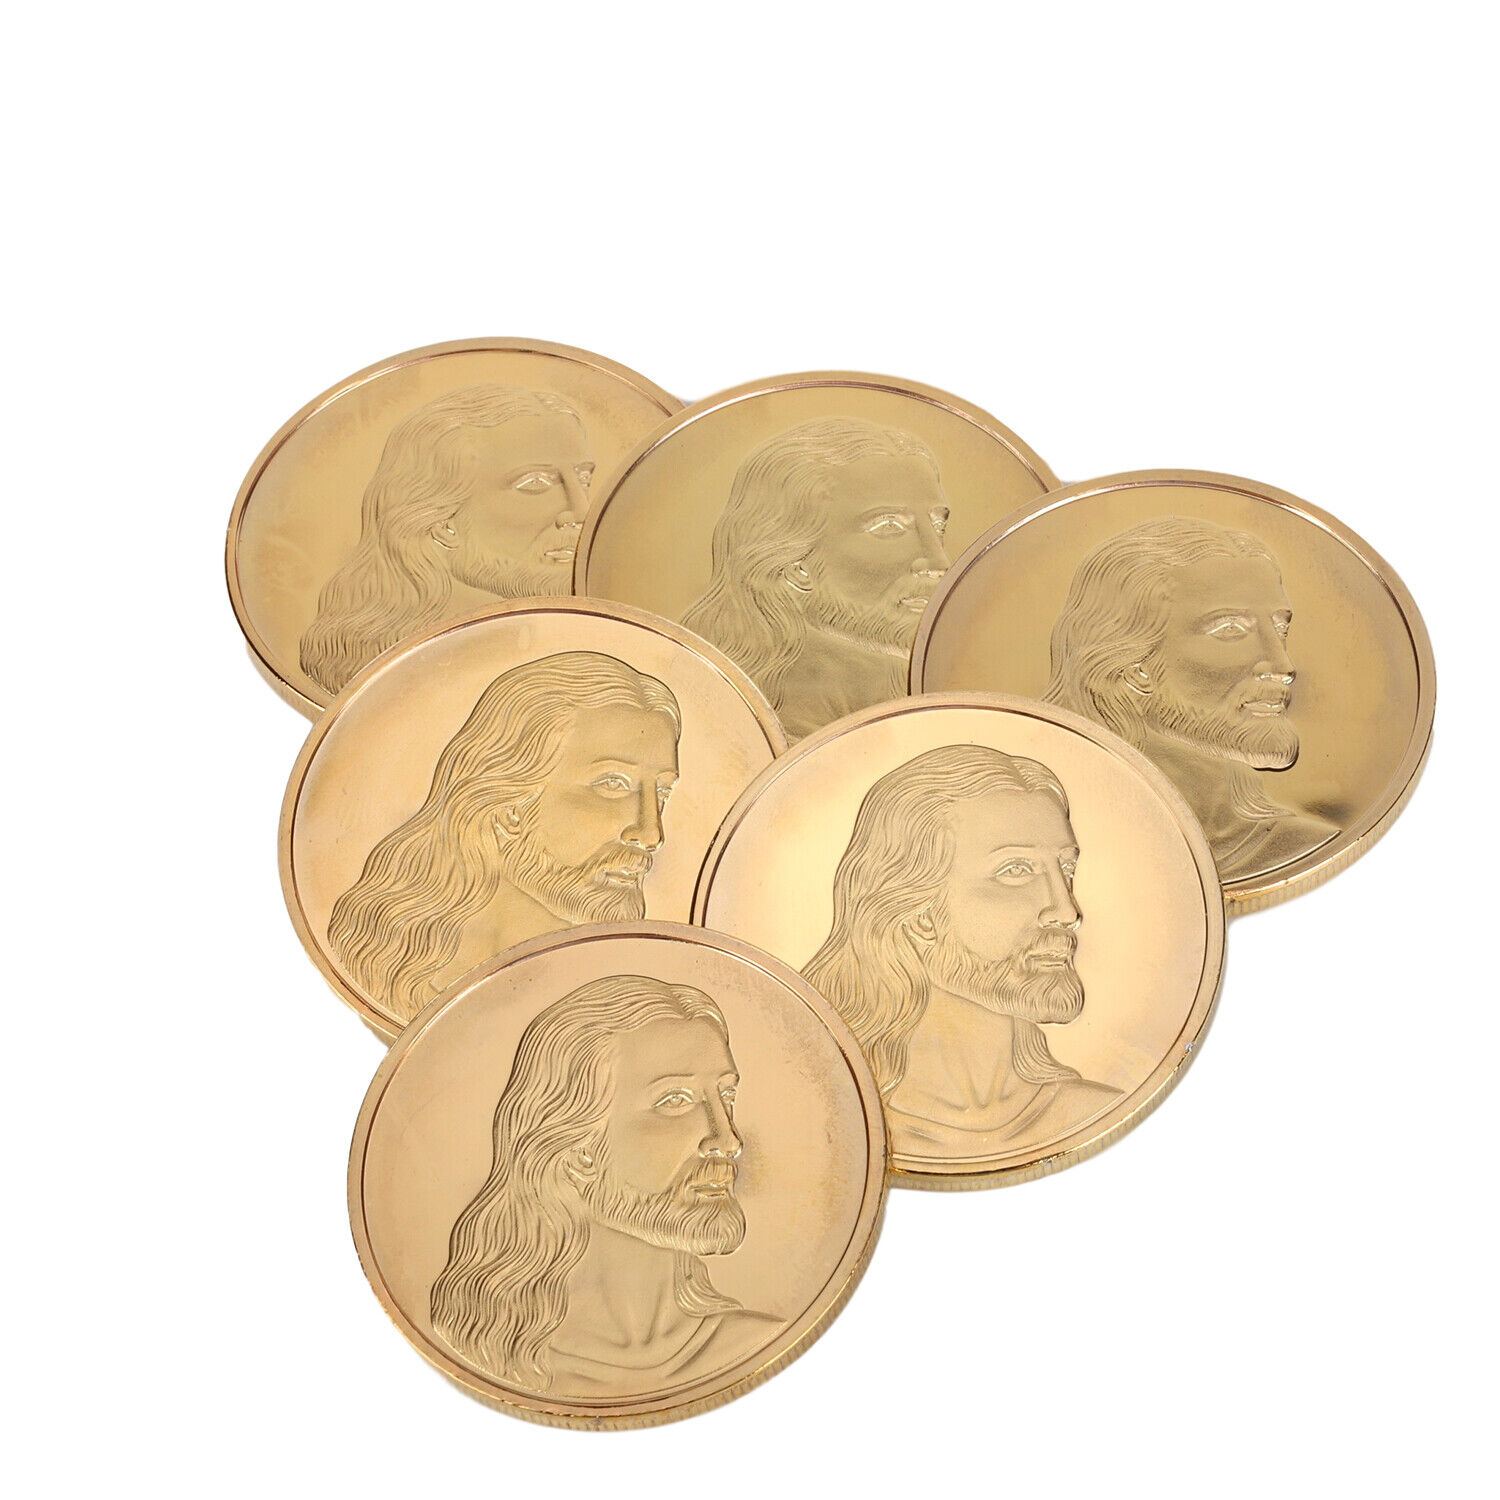 10Pcs Jesus The Last Supper Gold Plated  Coin Art Collection Coin Collectible